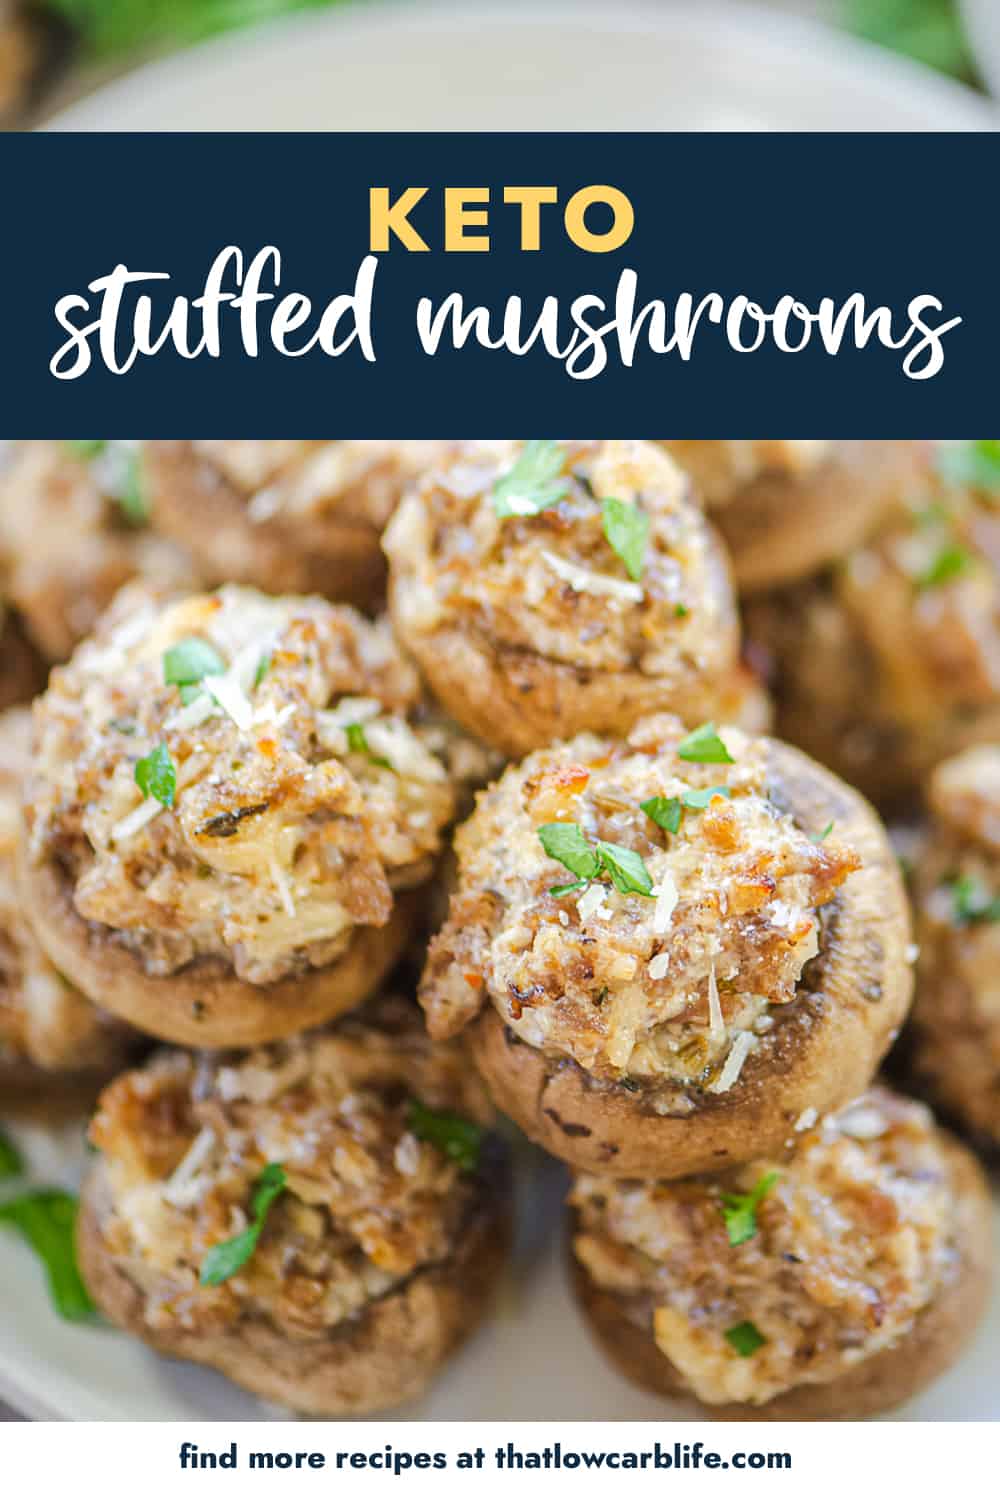 keto stuffed mushrooms in a pile with text for Pinterest.